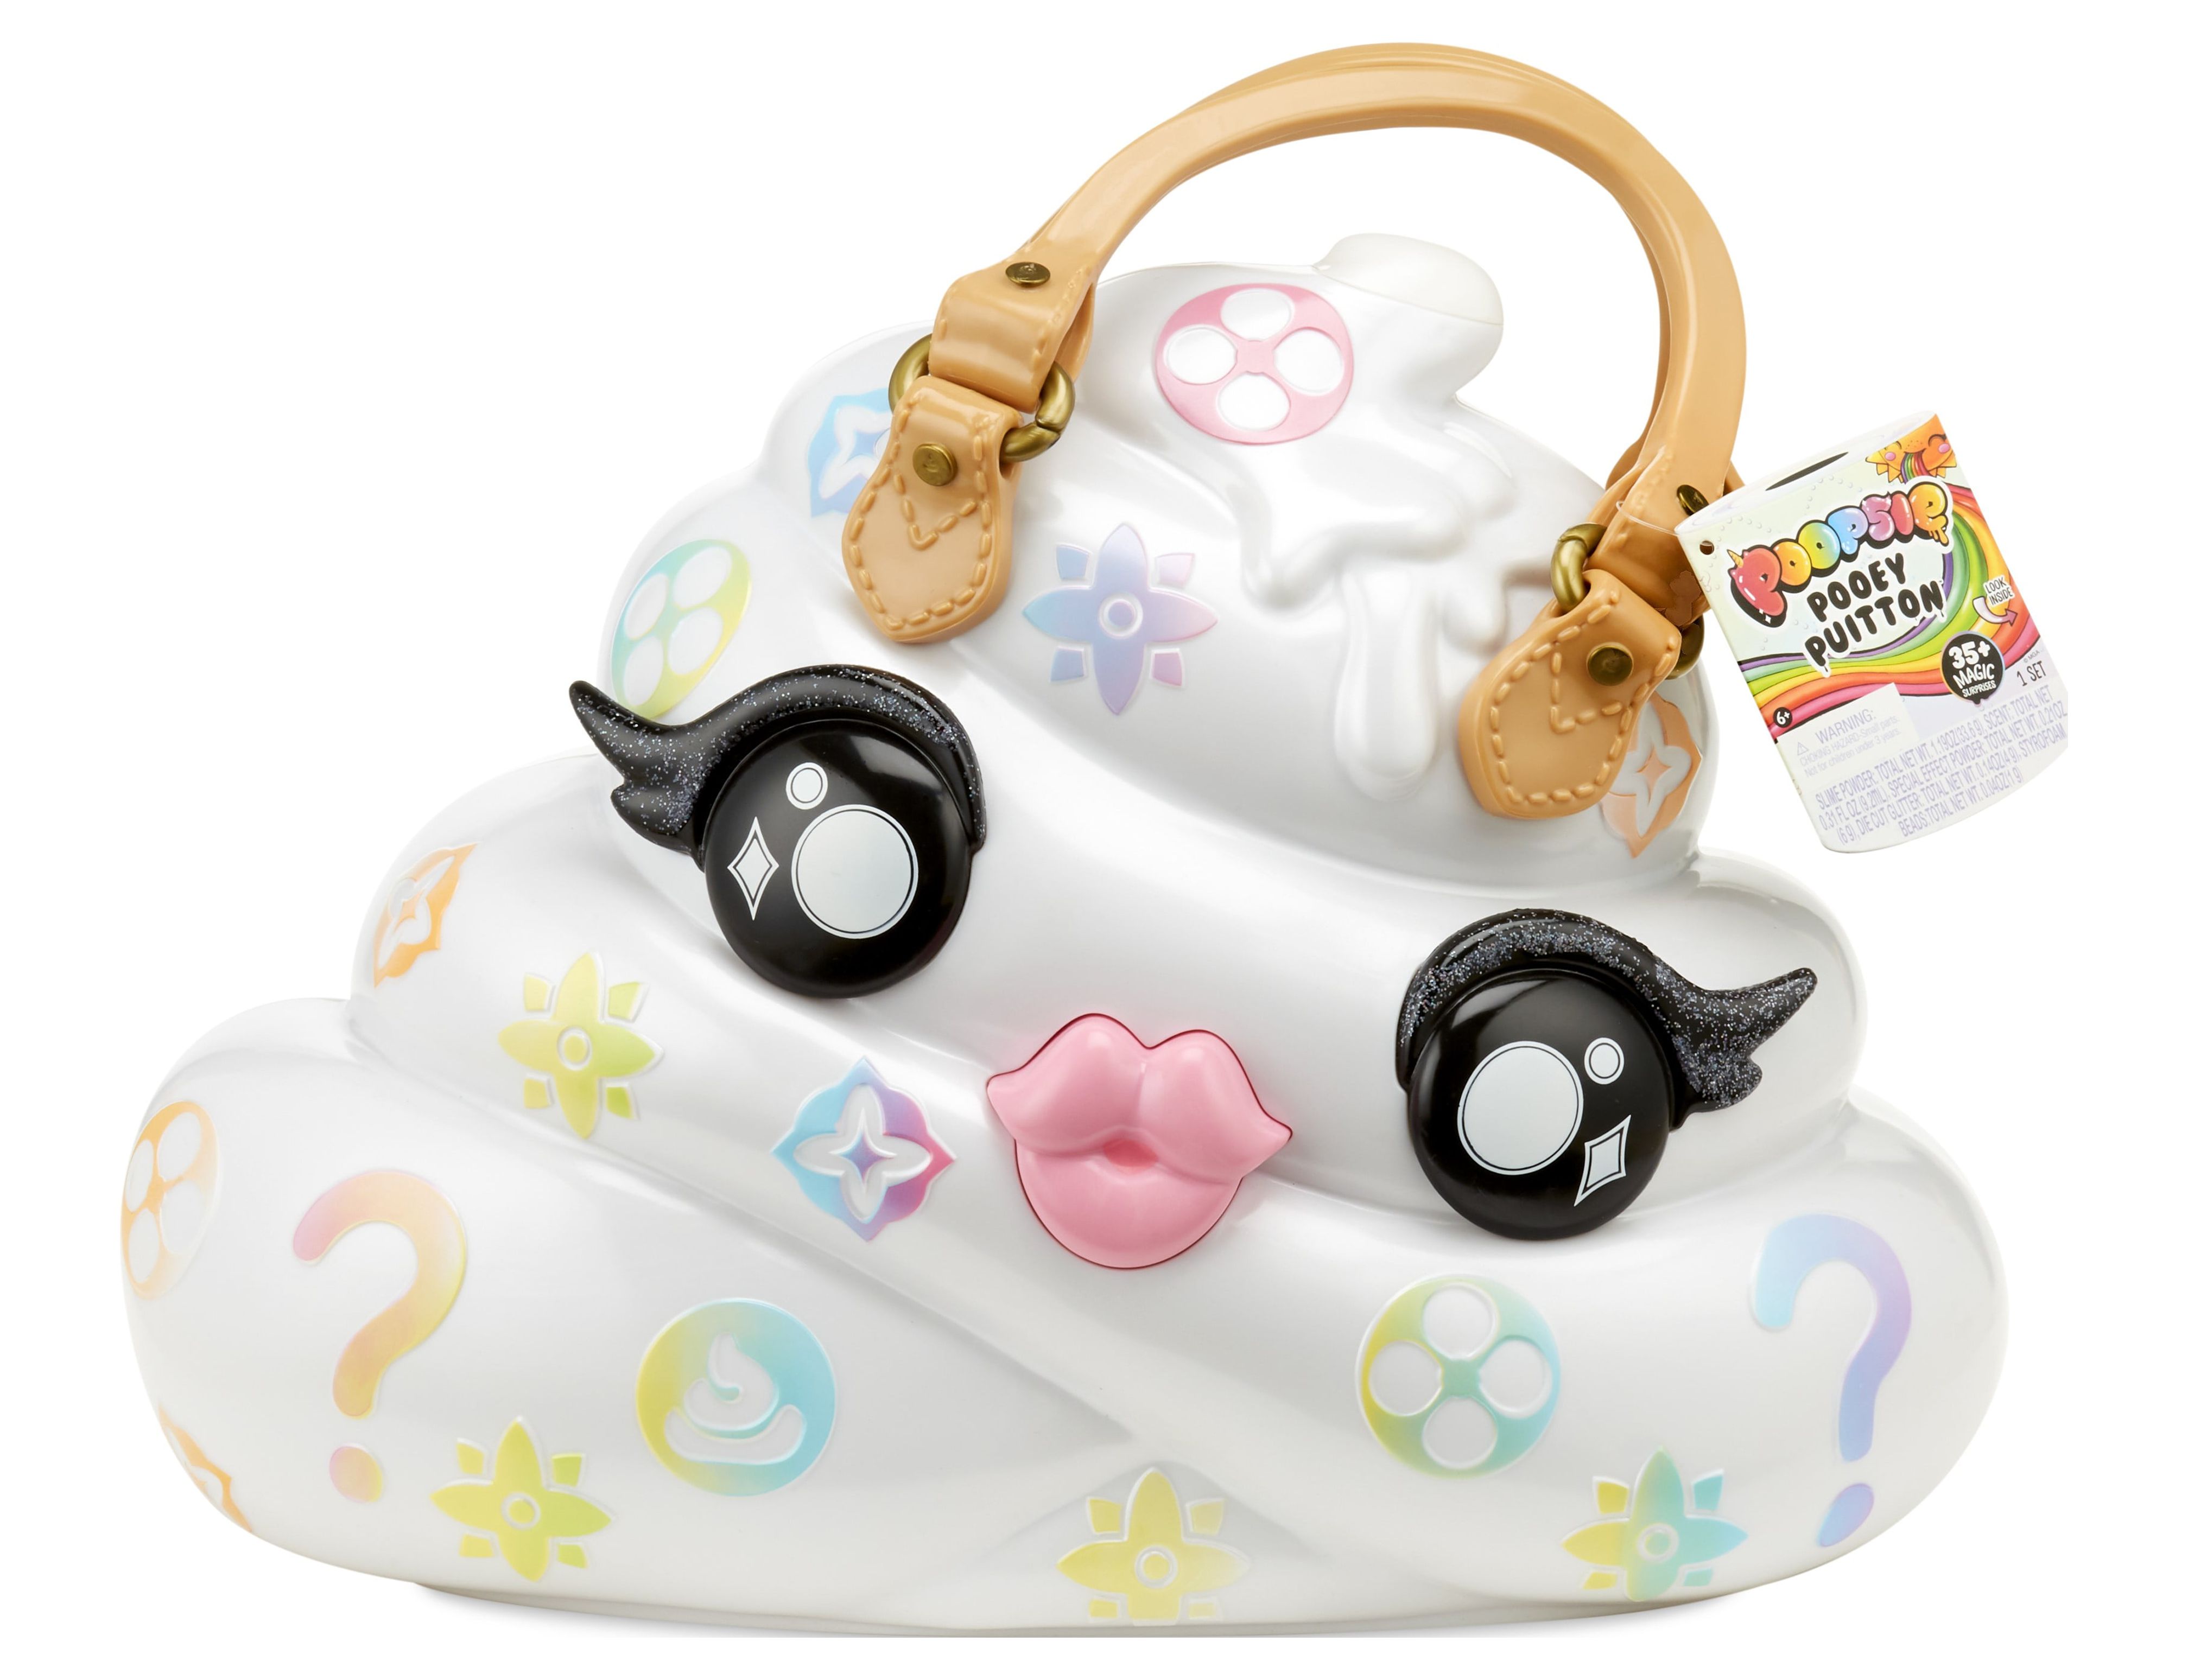 Poopsie Slime Surprise Pooey Puitton Purse with 35+ Magic Surprises - image 1 of 5